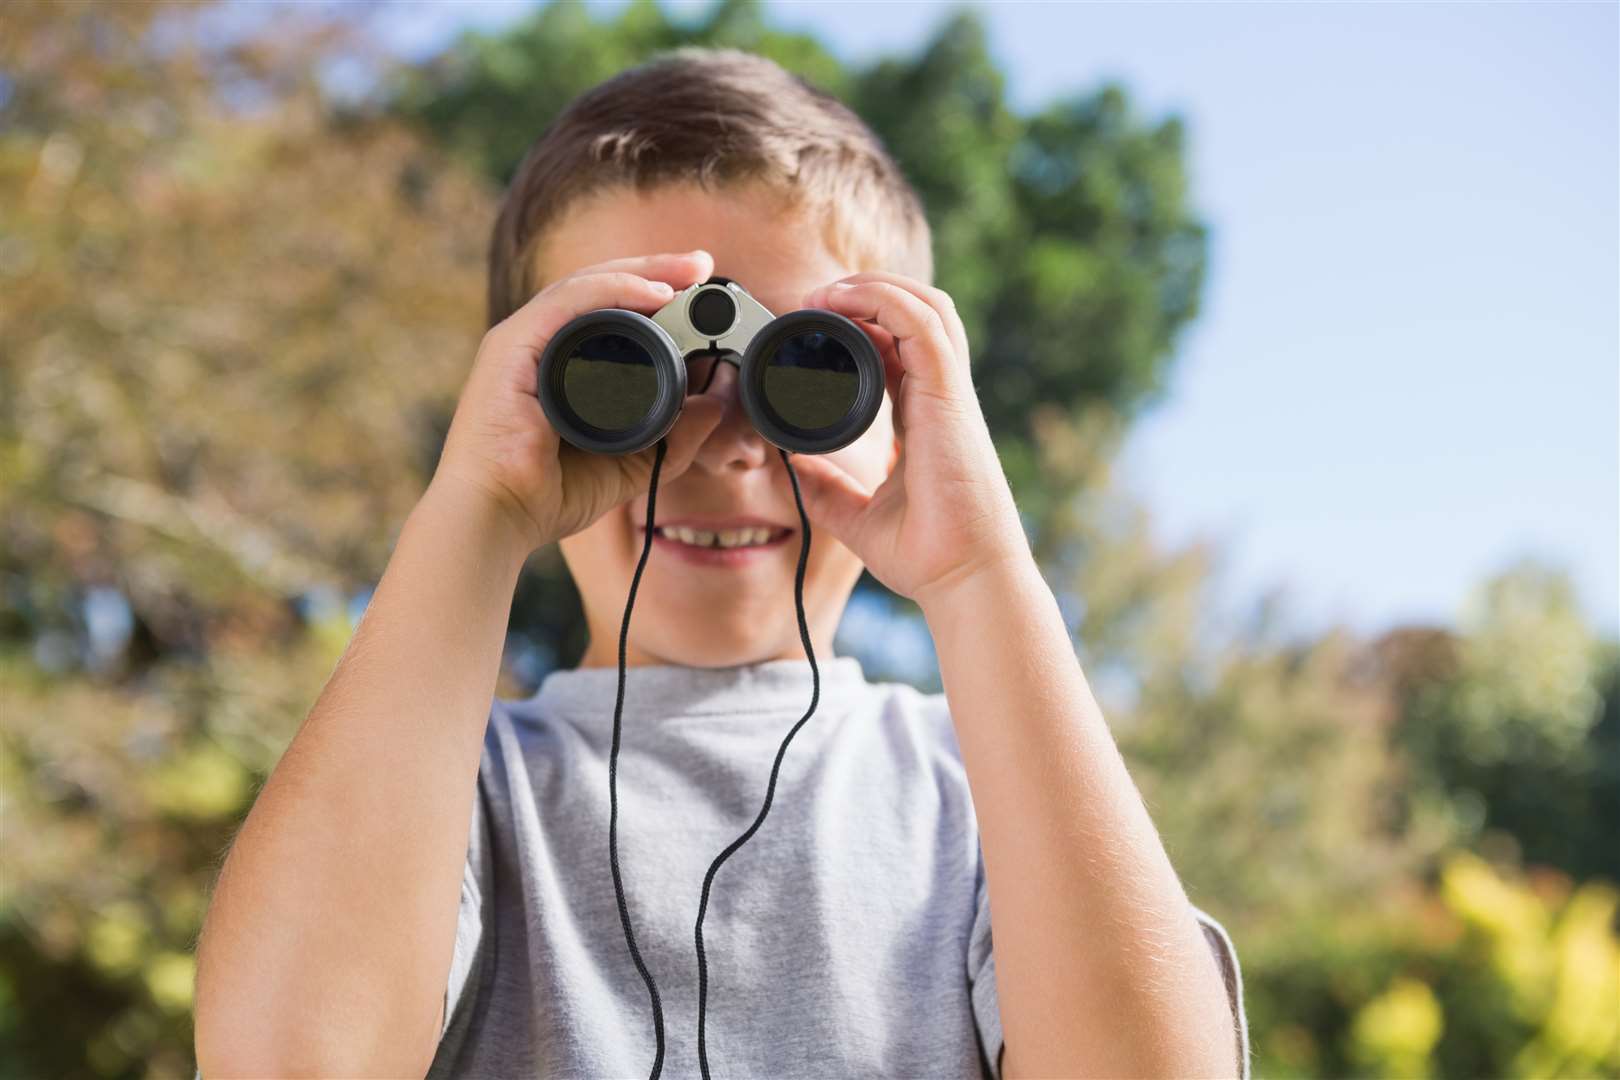 Binoculars - and knowledge - are provided